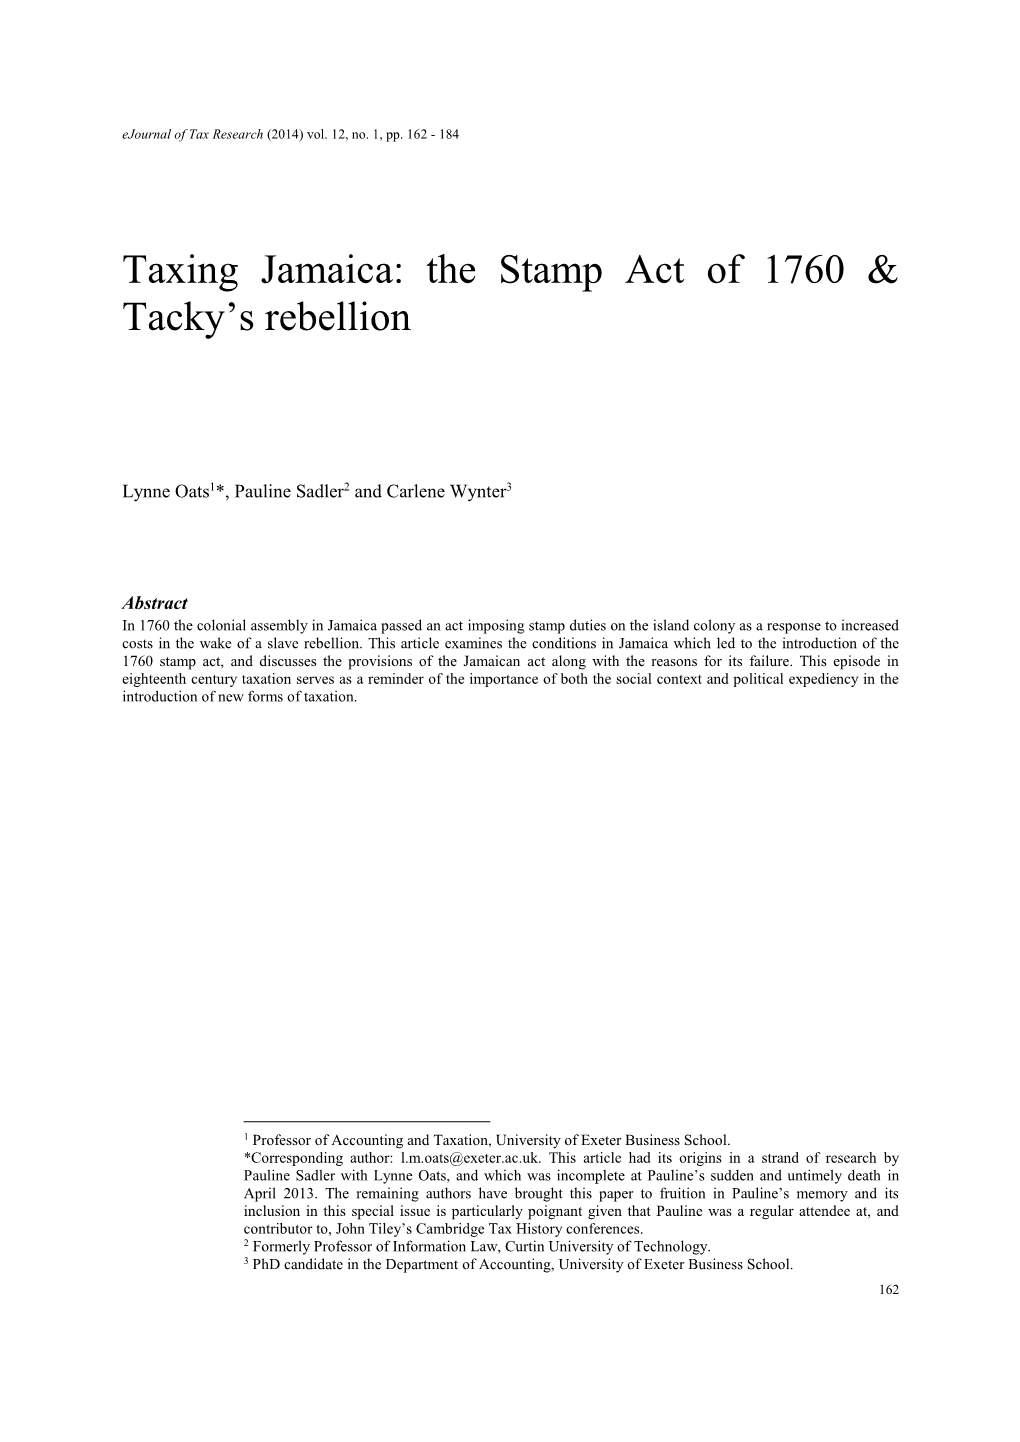 Taxing Jamaica: the Stamp Act of 1760 & Tacky's Rebellion